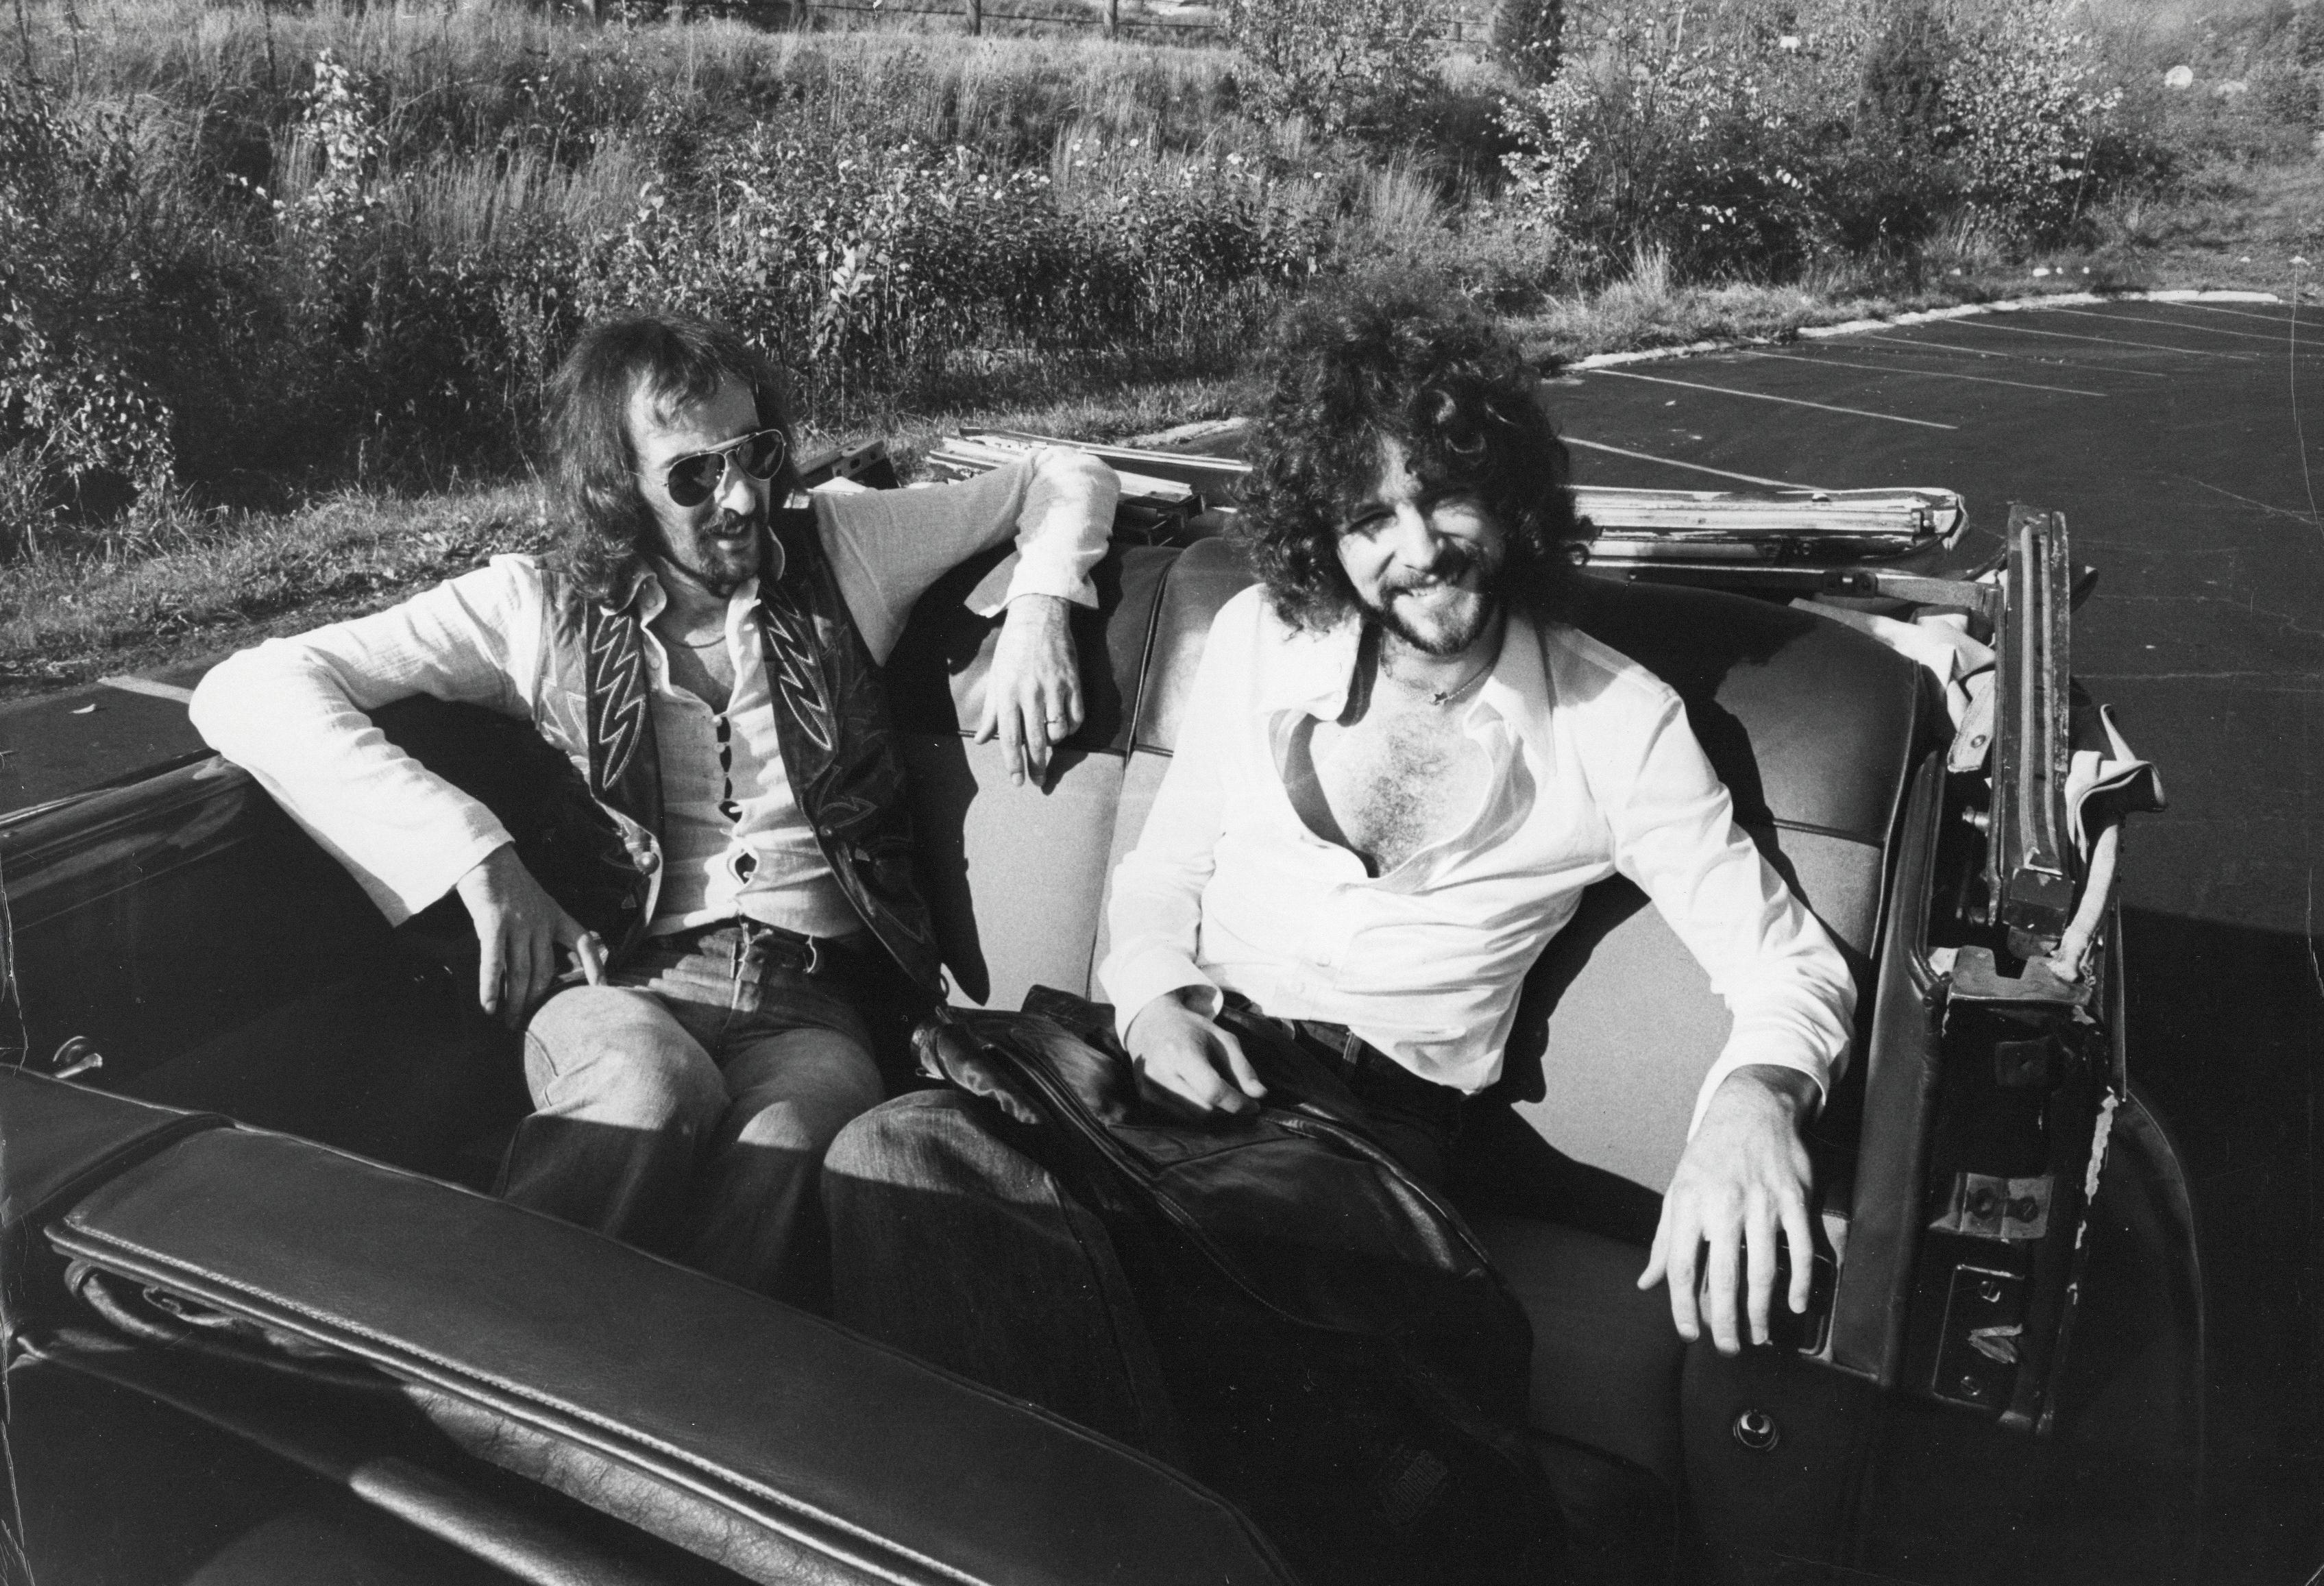 Fin Costello Black and White Photograph - John McVie and Bob Welch of Feetwood Mac in Backseat Vintage Original Photograph